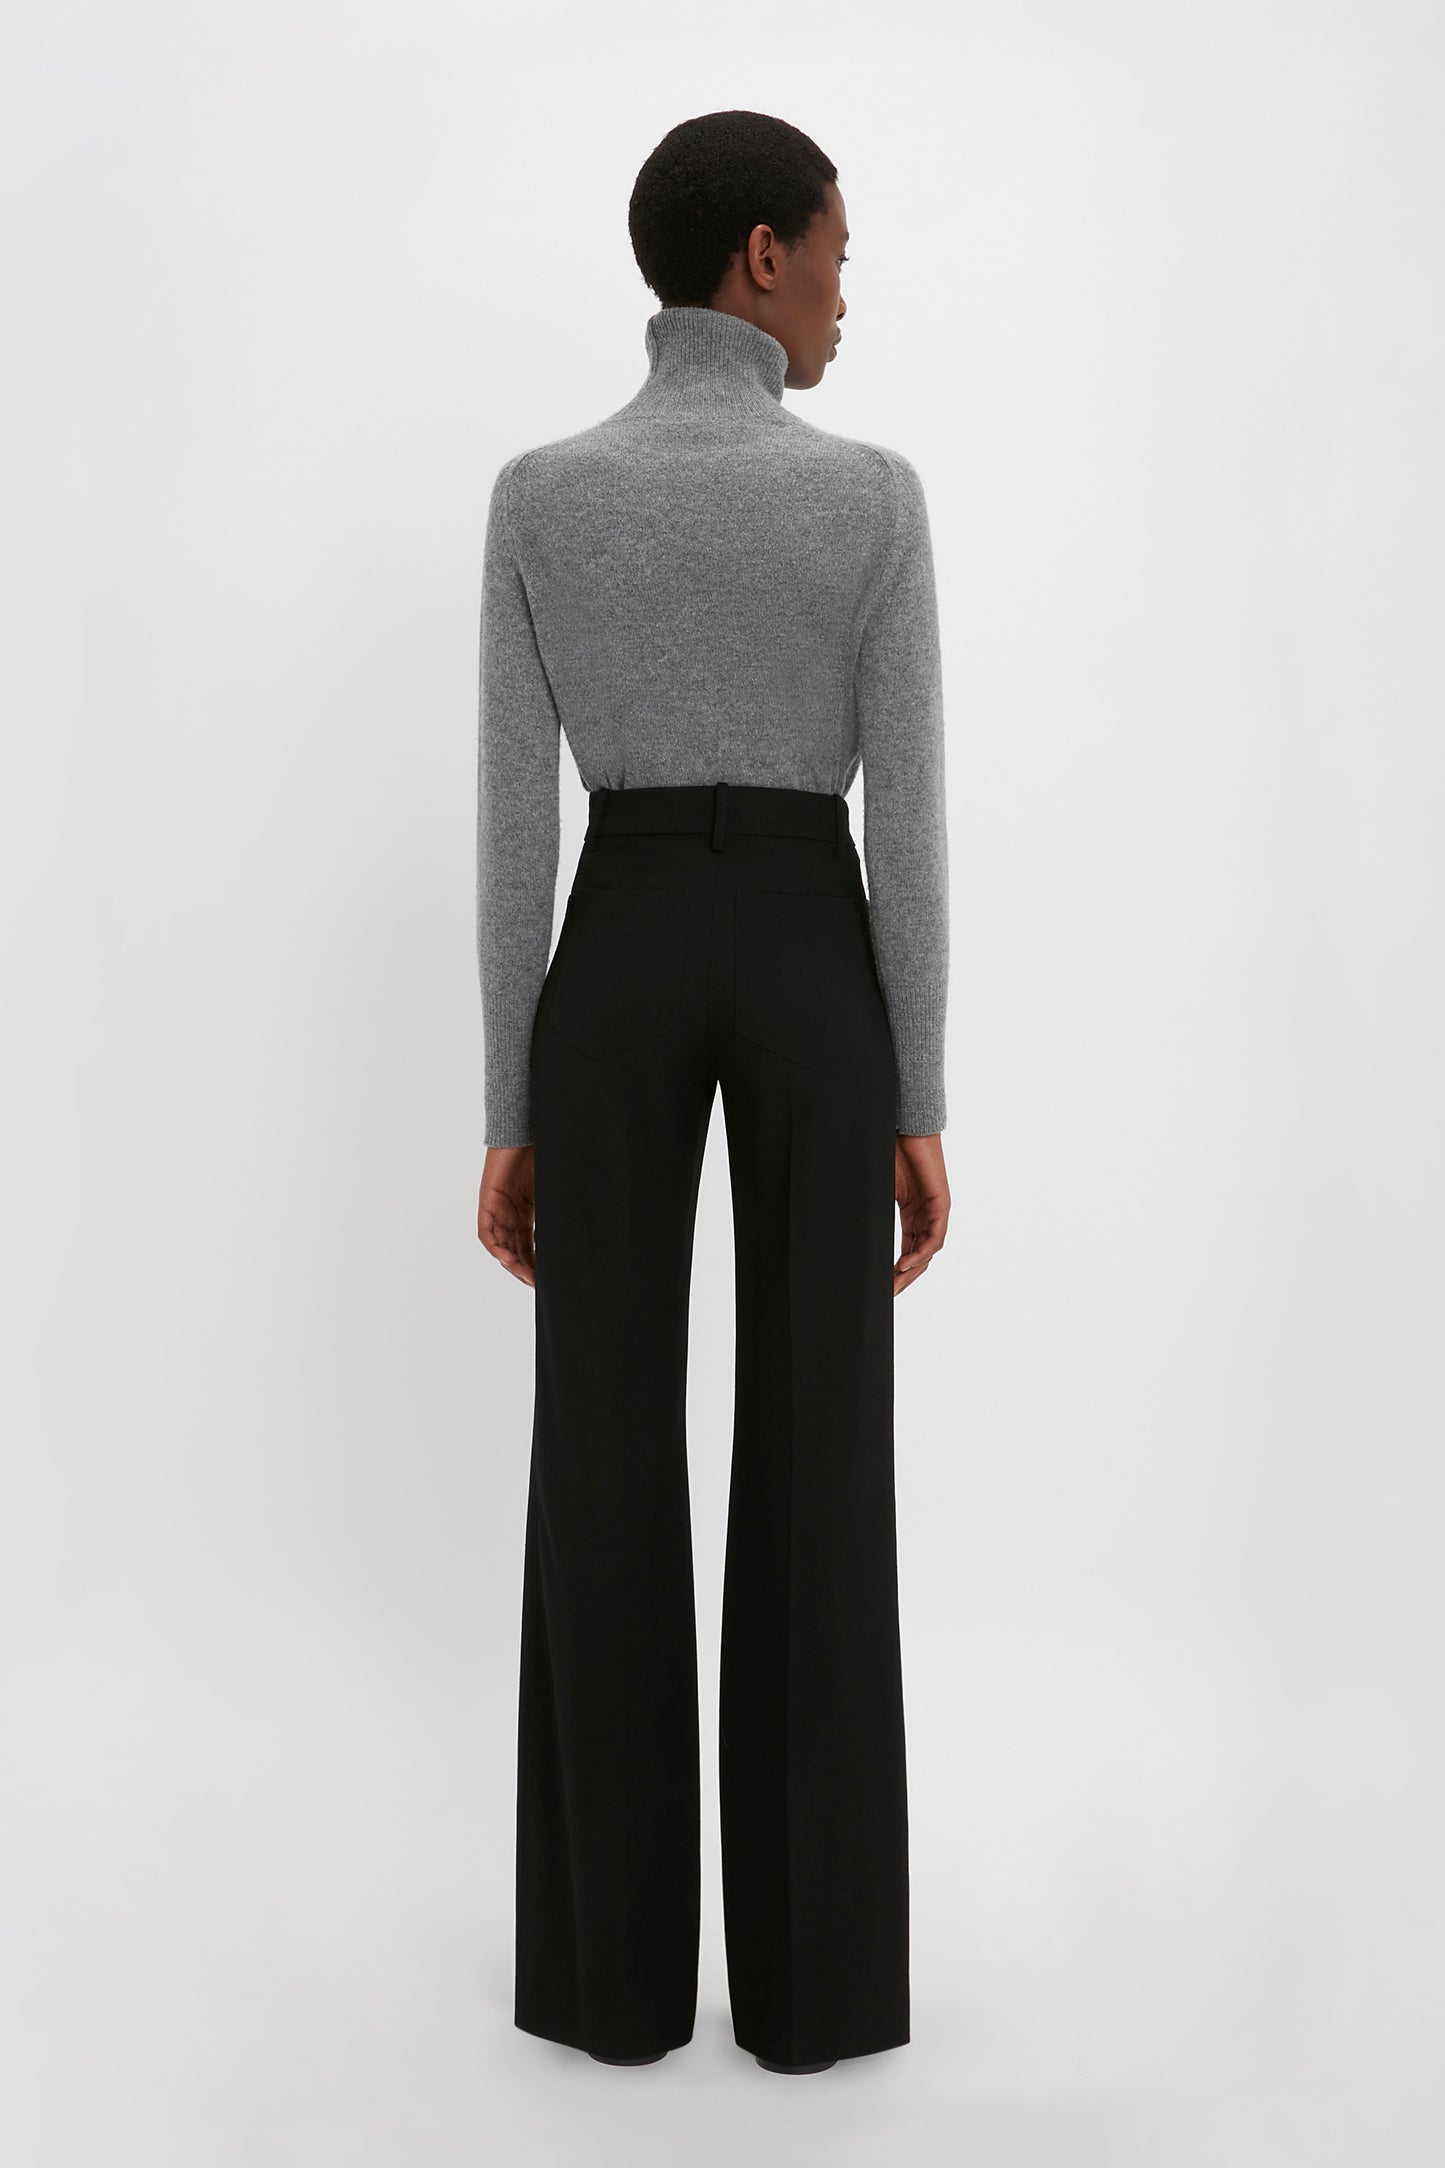 Rear view of a woman standing against a white background, wearing a gray turtleneck and Victoria Beckham's Alina Tailored Trouser In Black.